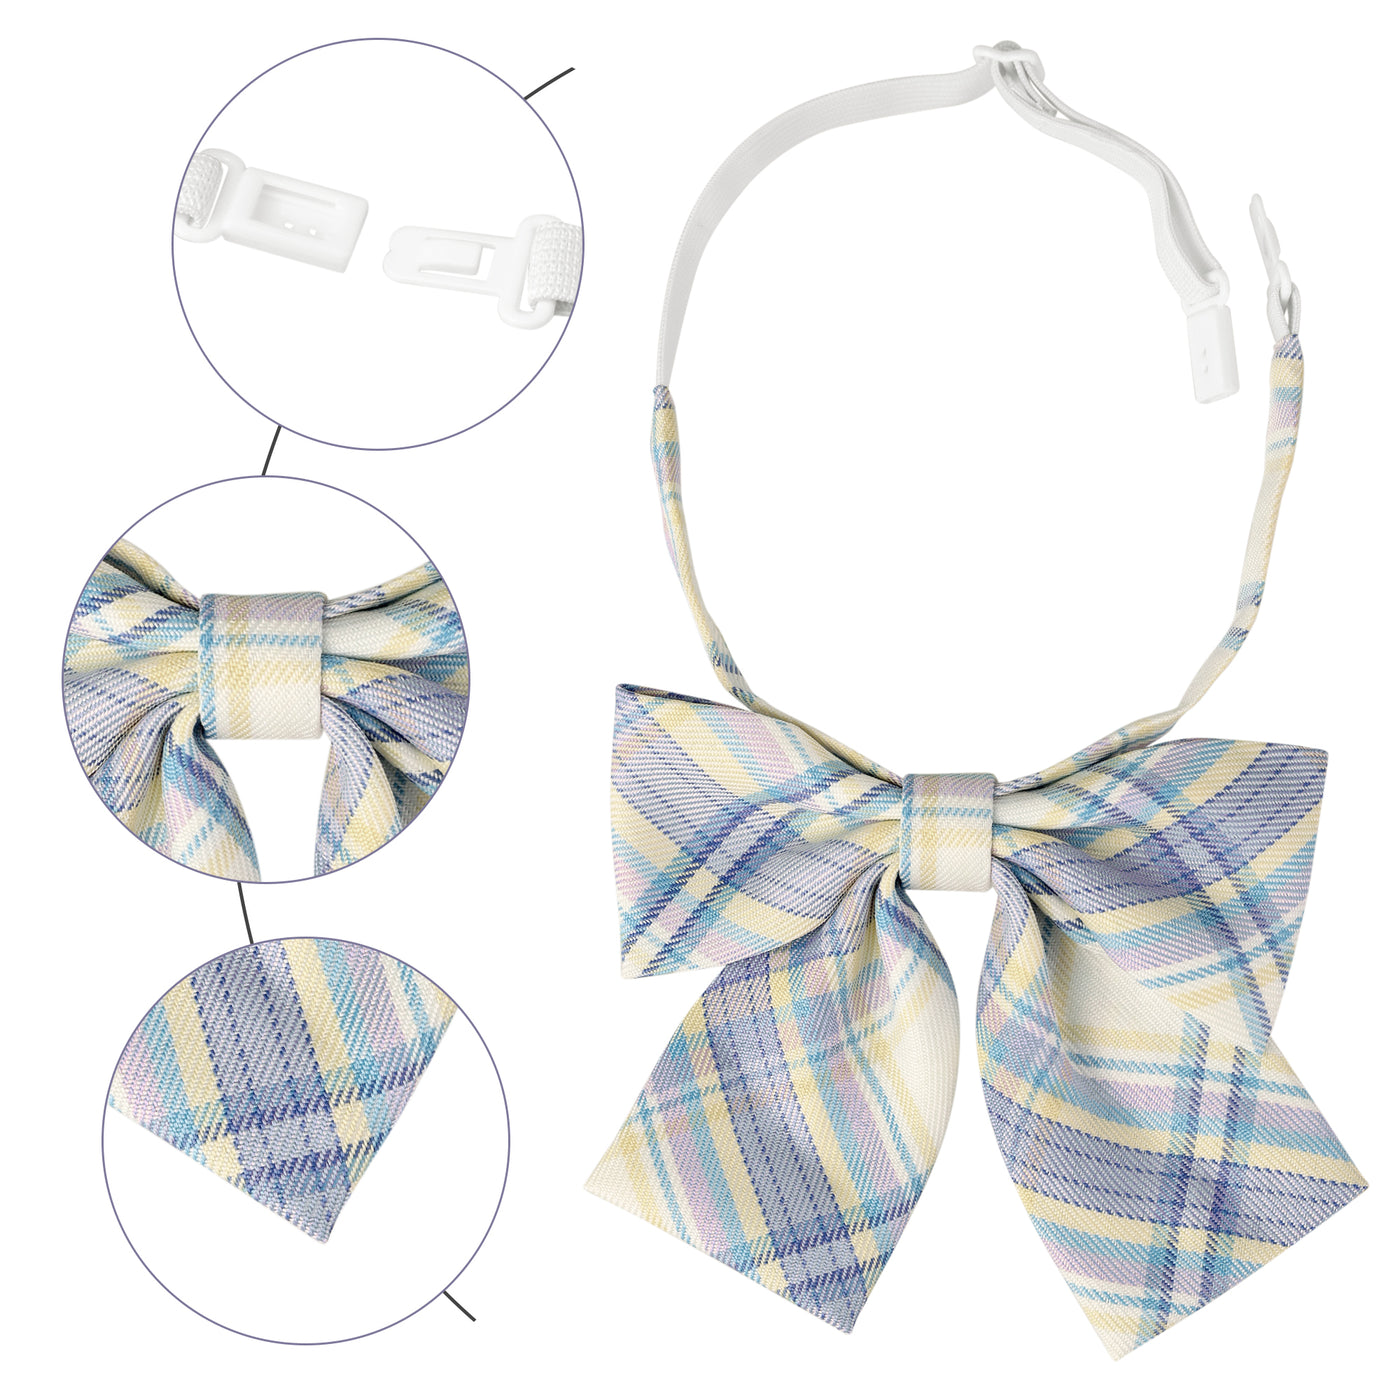 Bublédon Plaid Uniform Pre-tied Knot Cute Stylish Colorful Bow Ties for Women